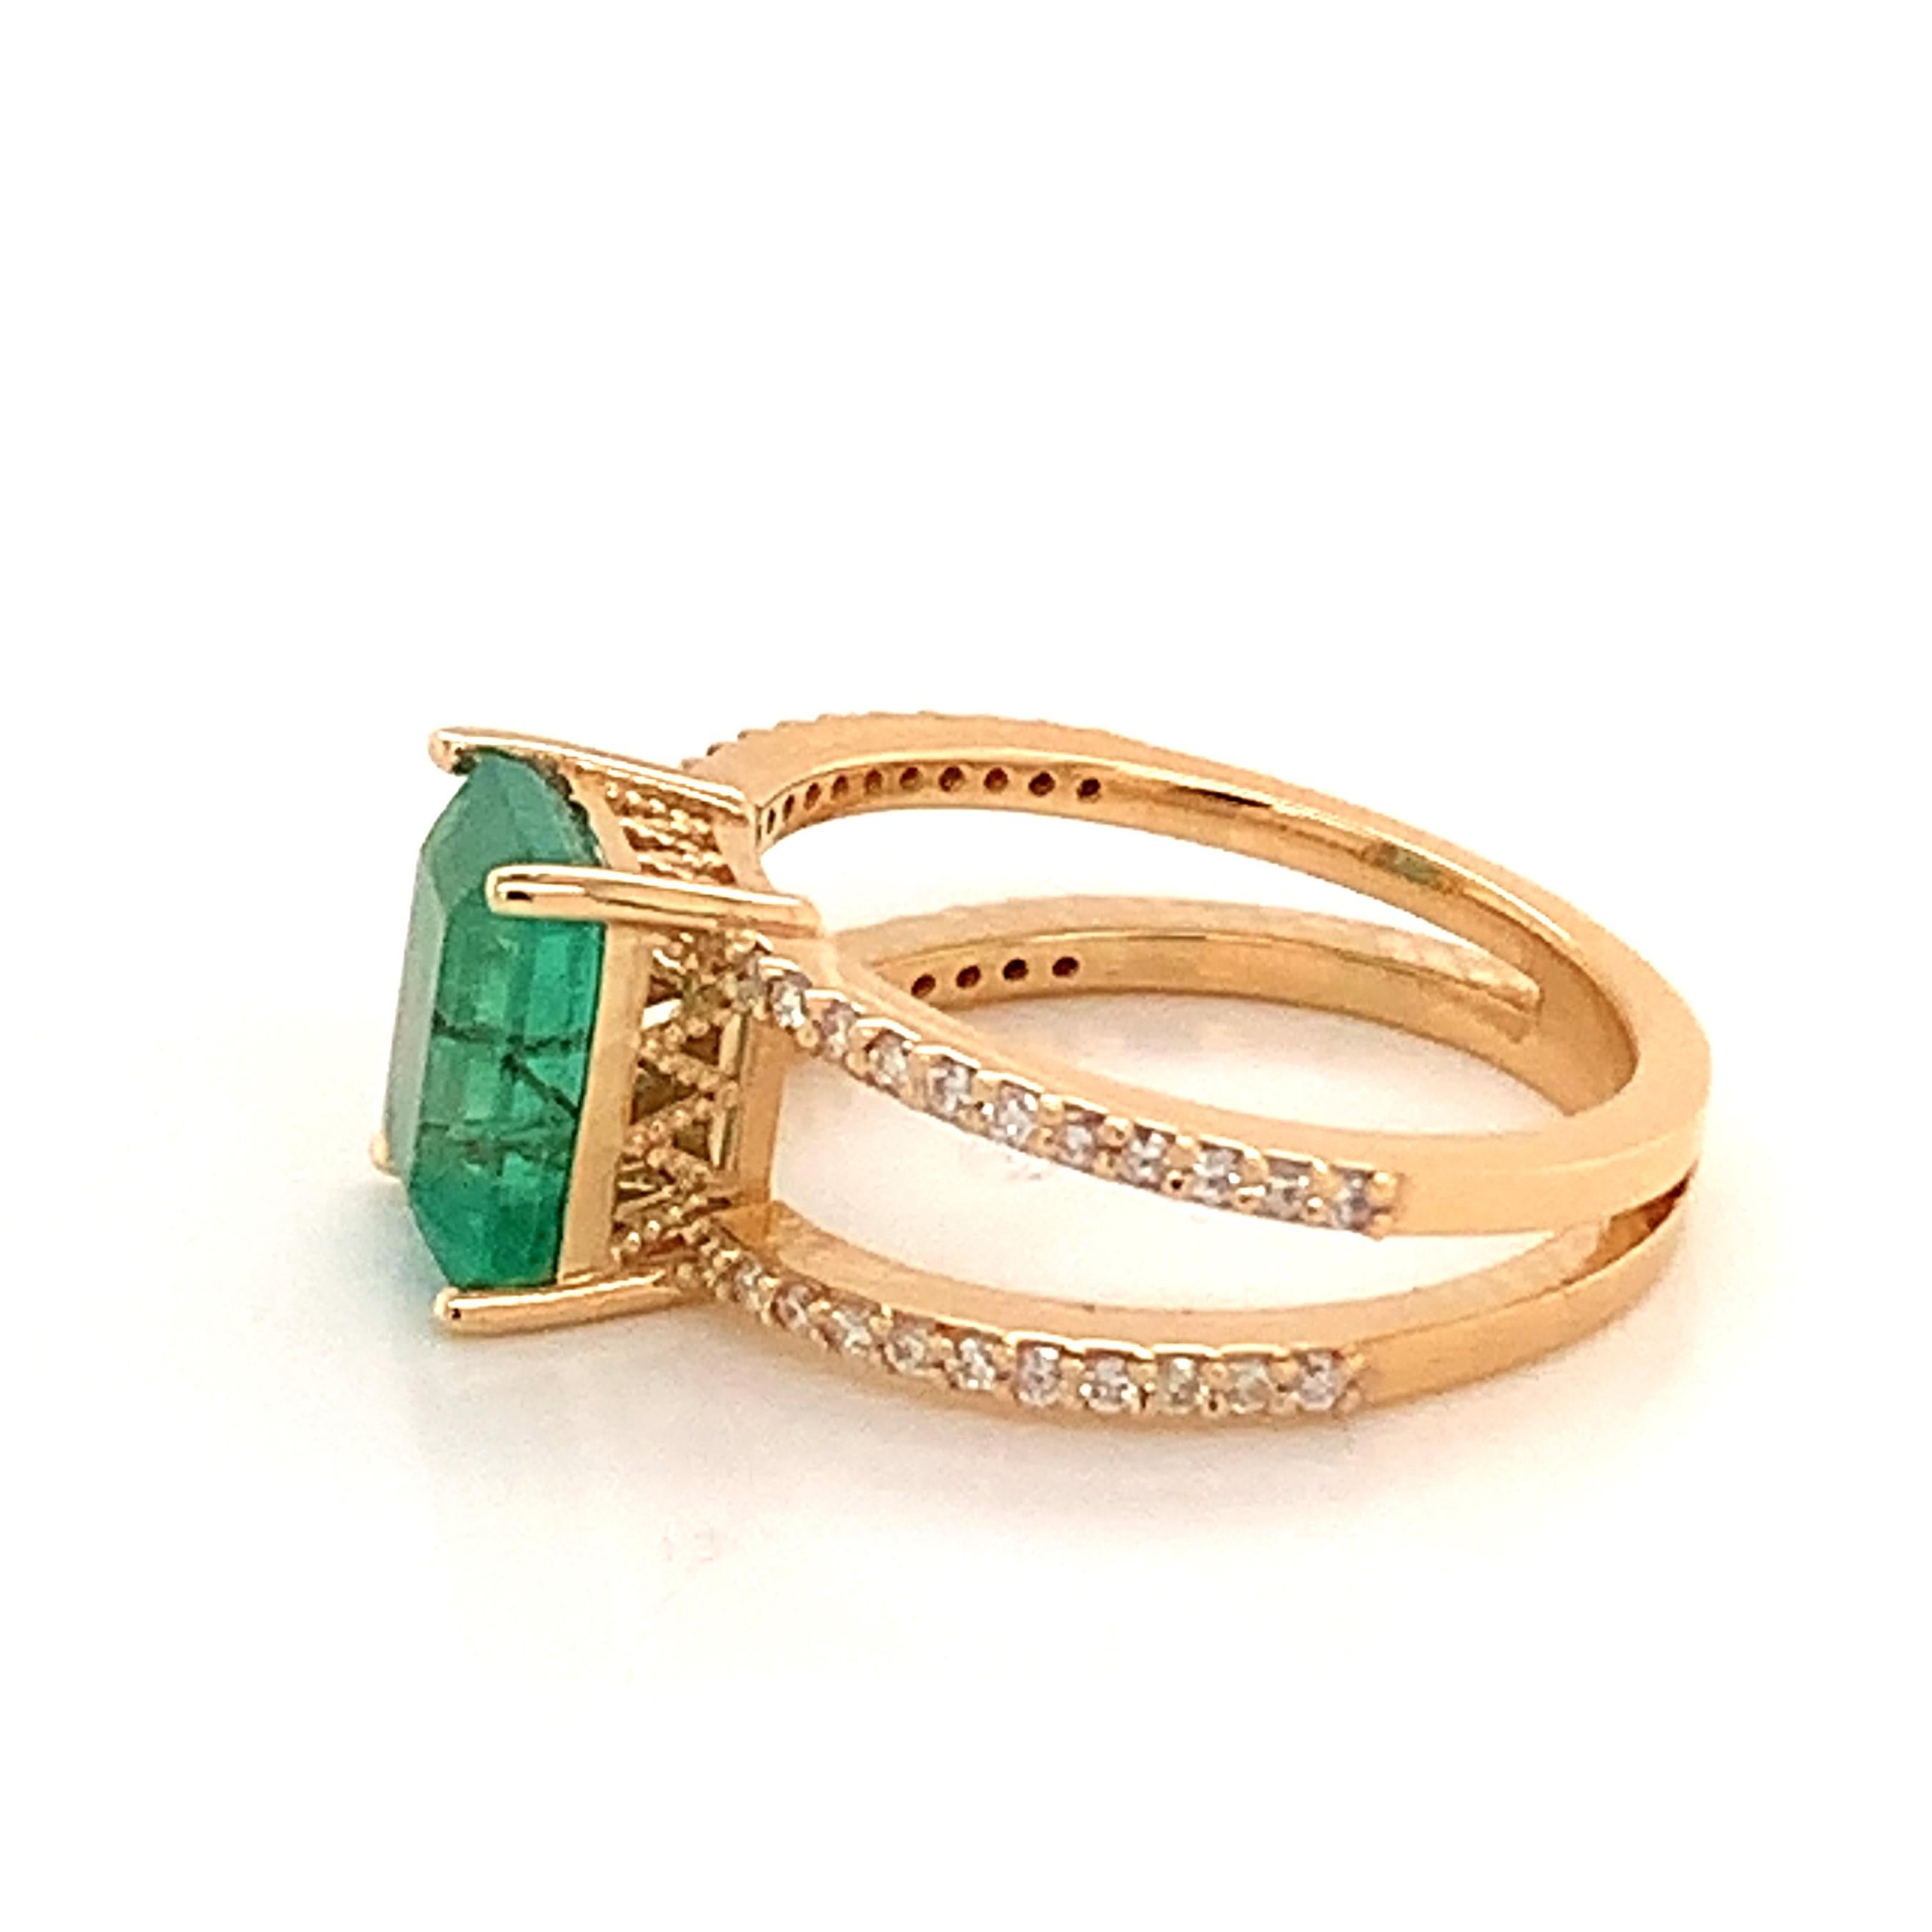 Natural Emerald Diamond Ring 14k Gold 2.32 TCW Certified For Sale 3